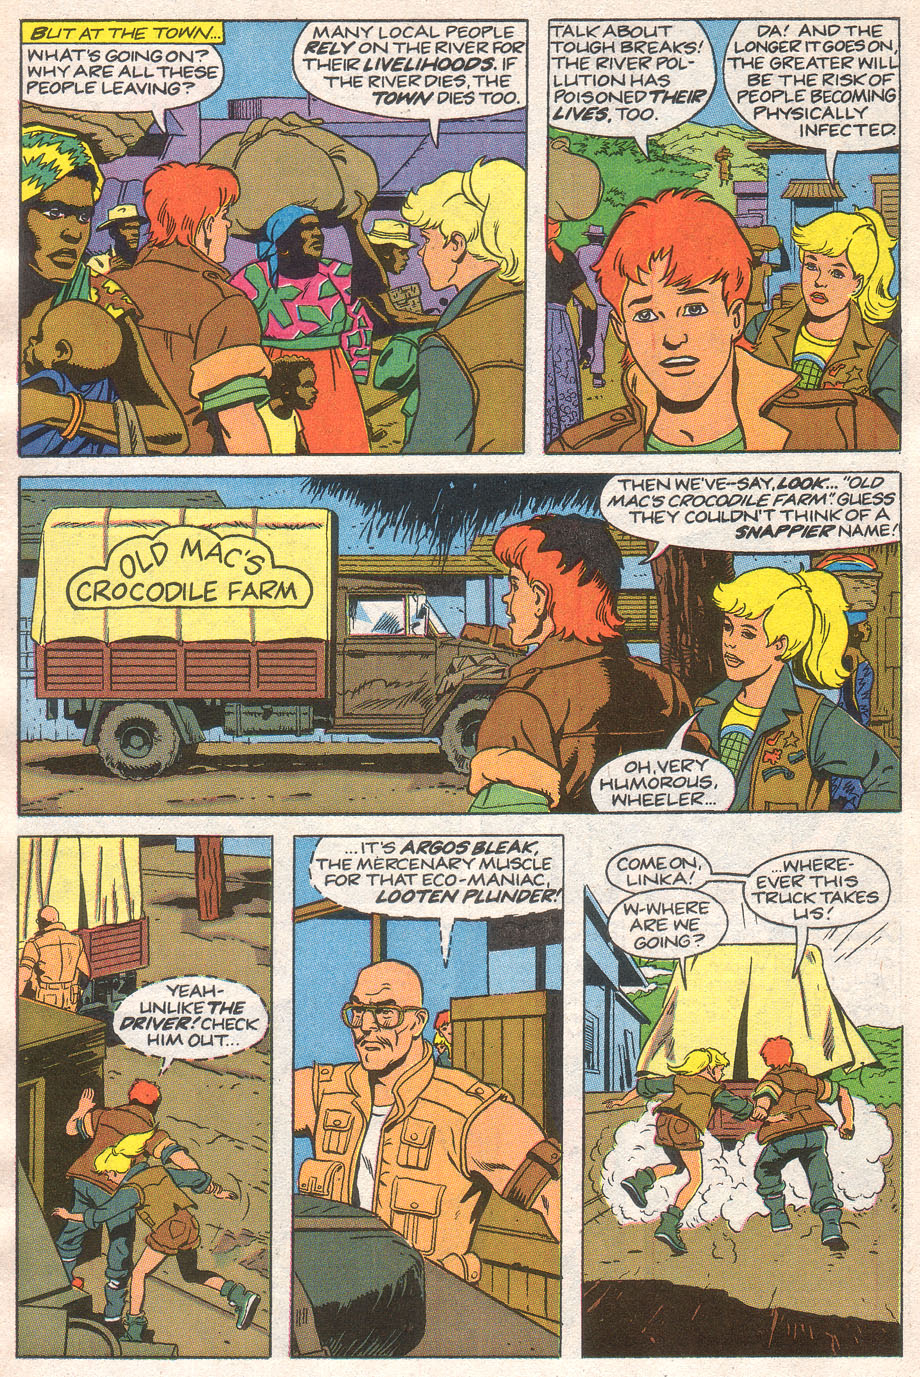 Captain Planet and the Planeteers 7 Page 21